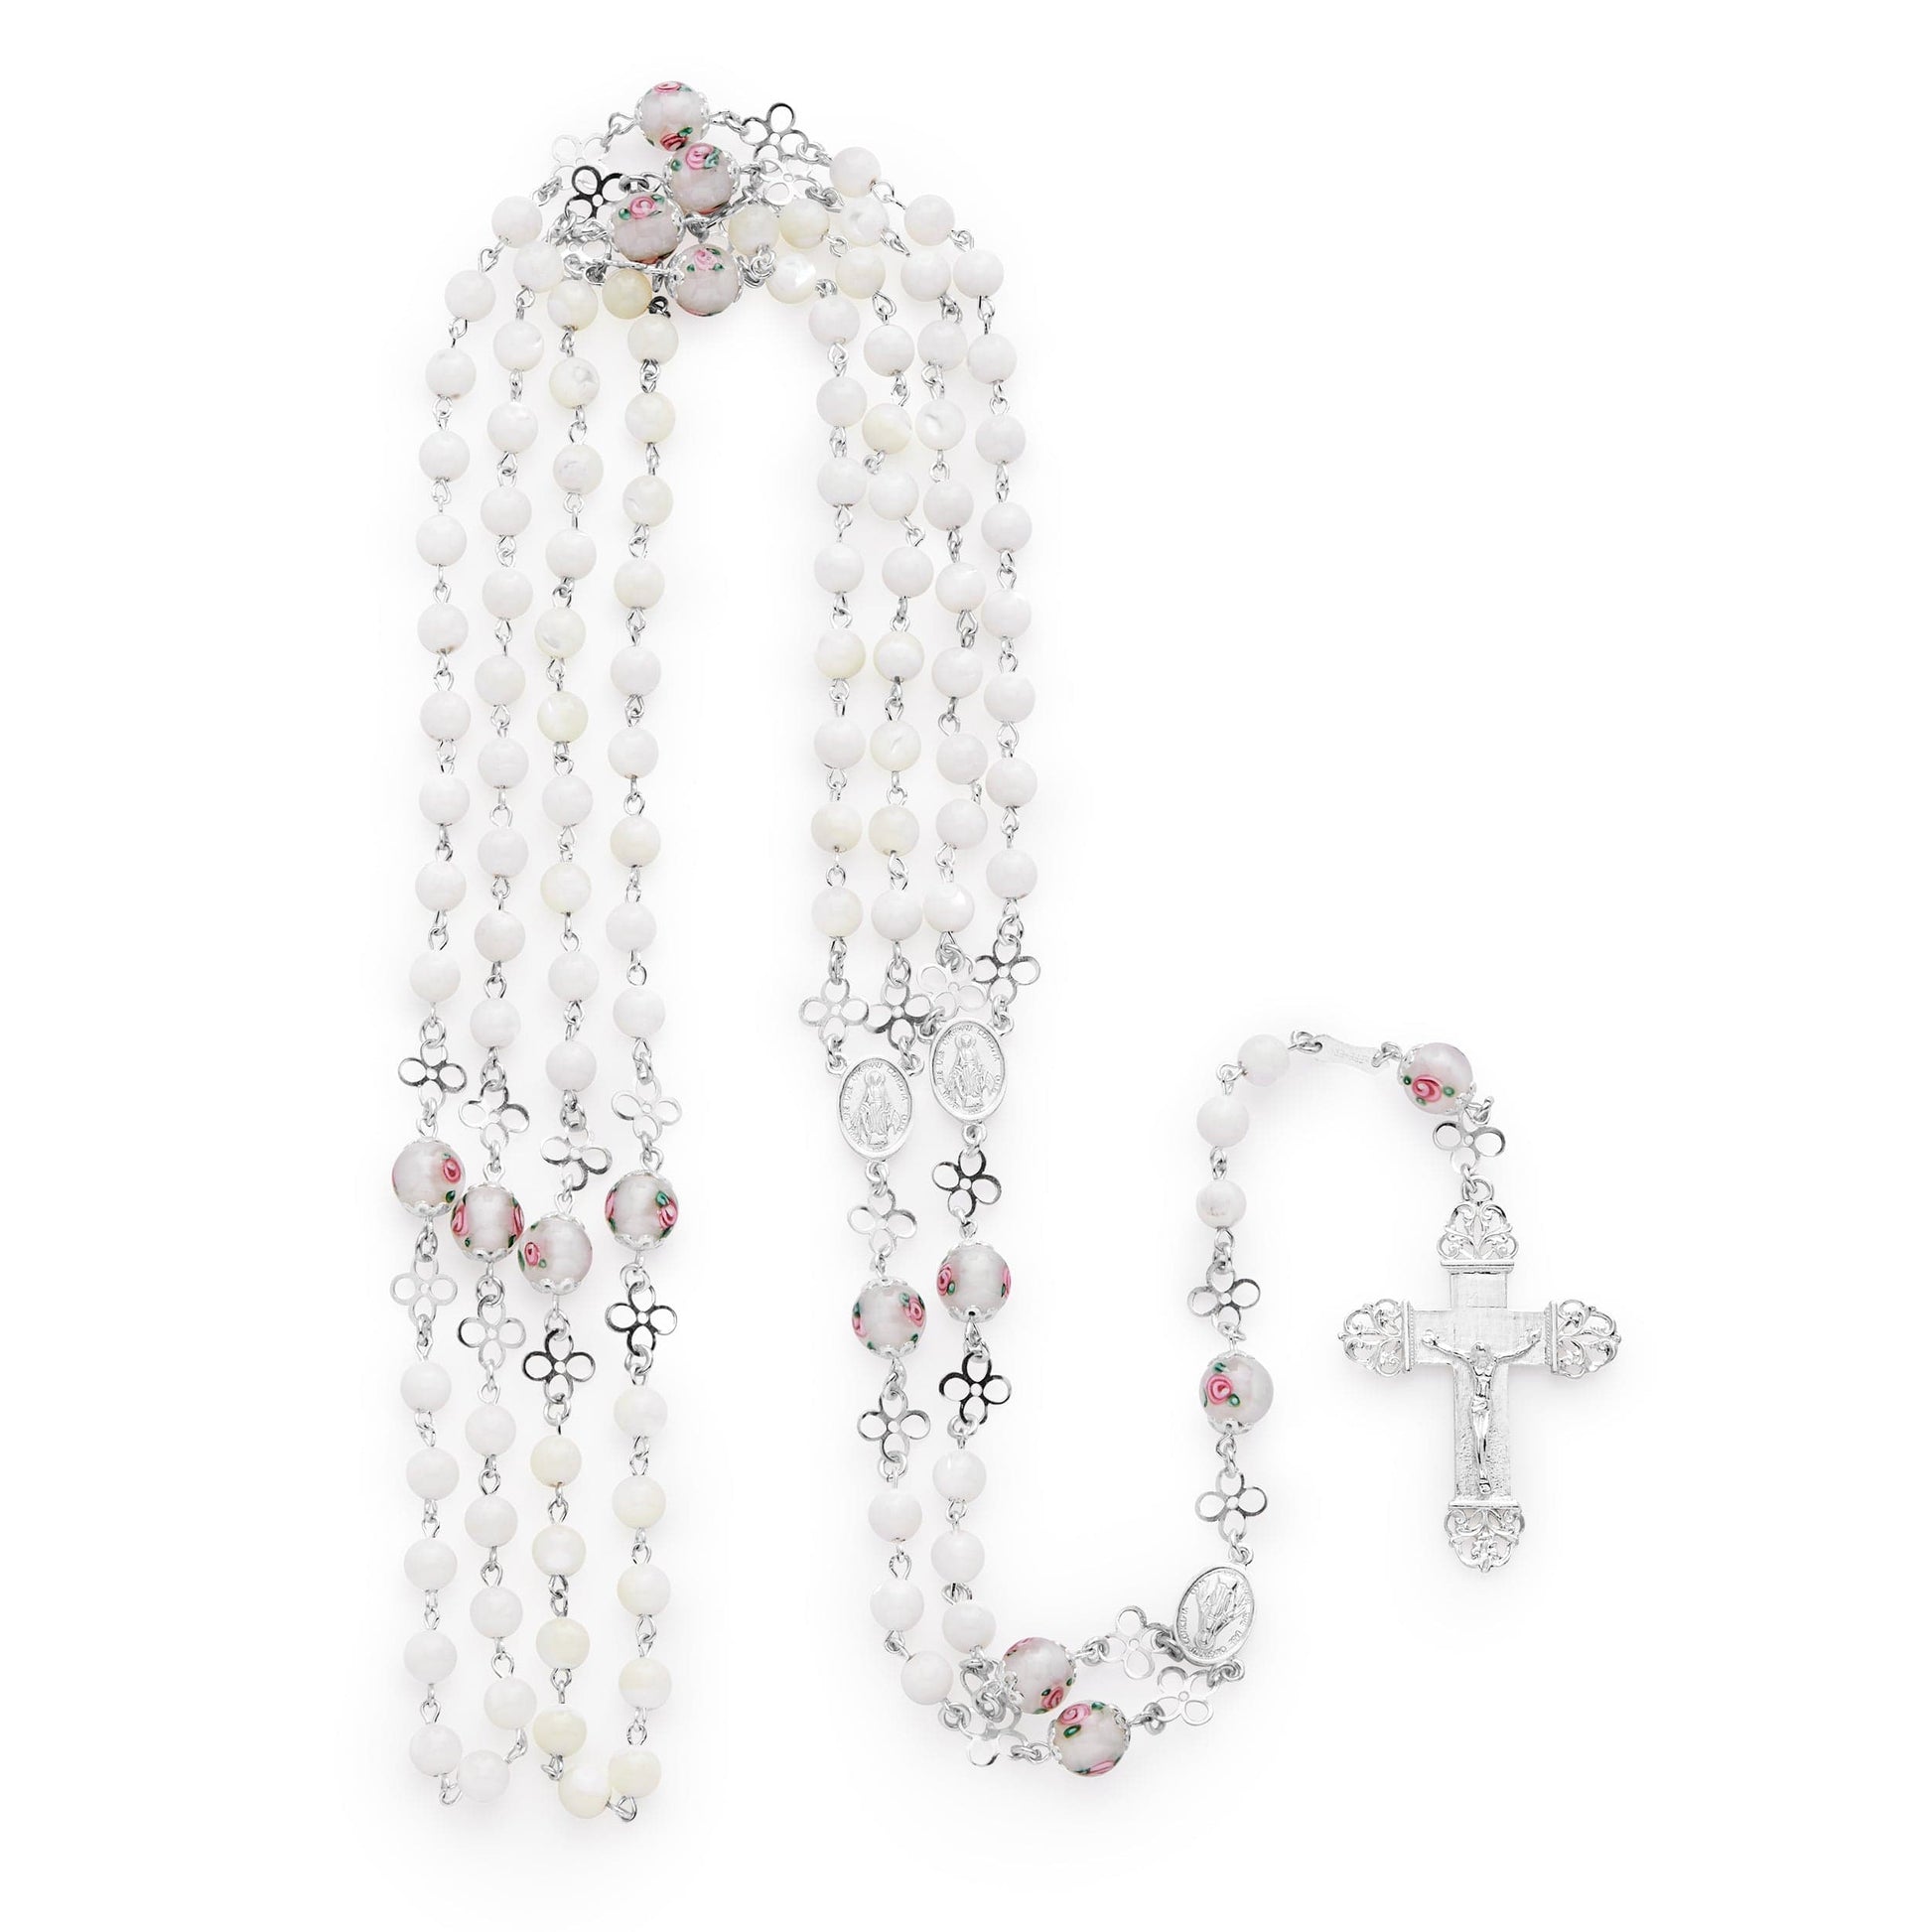 MONDO CATTOLICO Prayer Beads 51 cm (20.07 in) / 4 mm (0.15 in) Sterling Silver Miraculous Mary Wedding Rosary